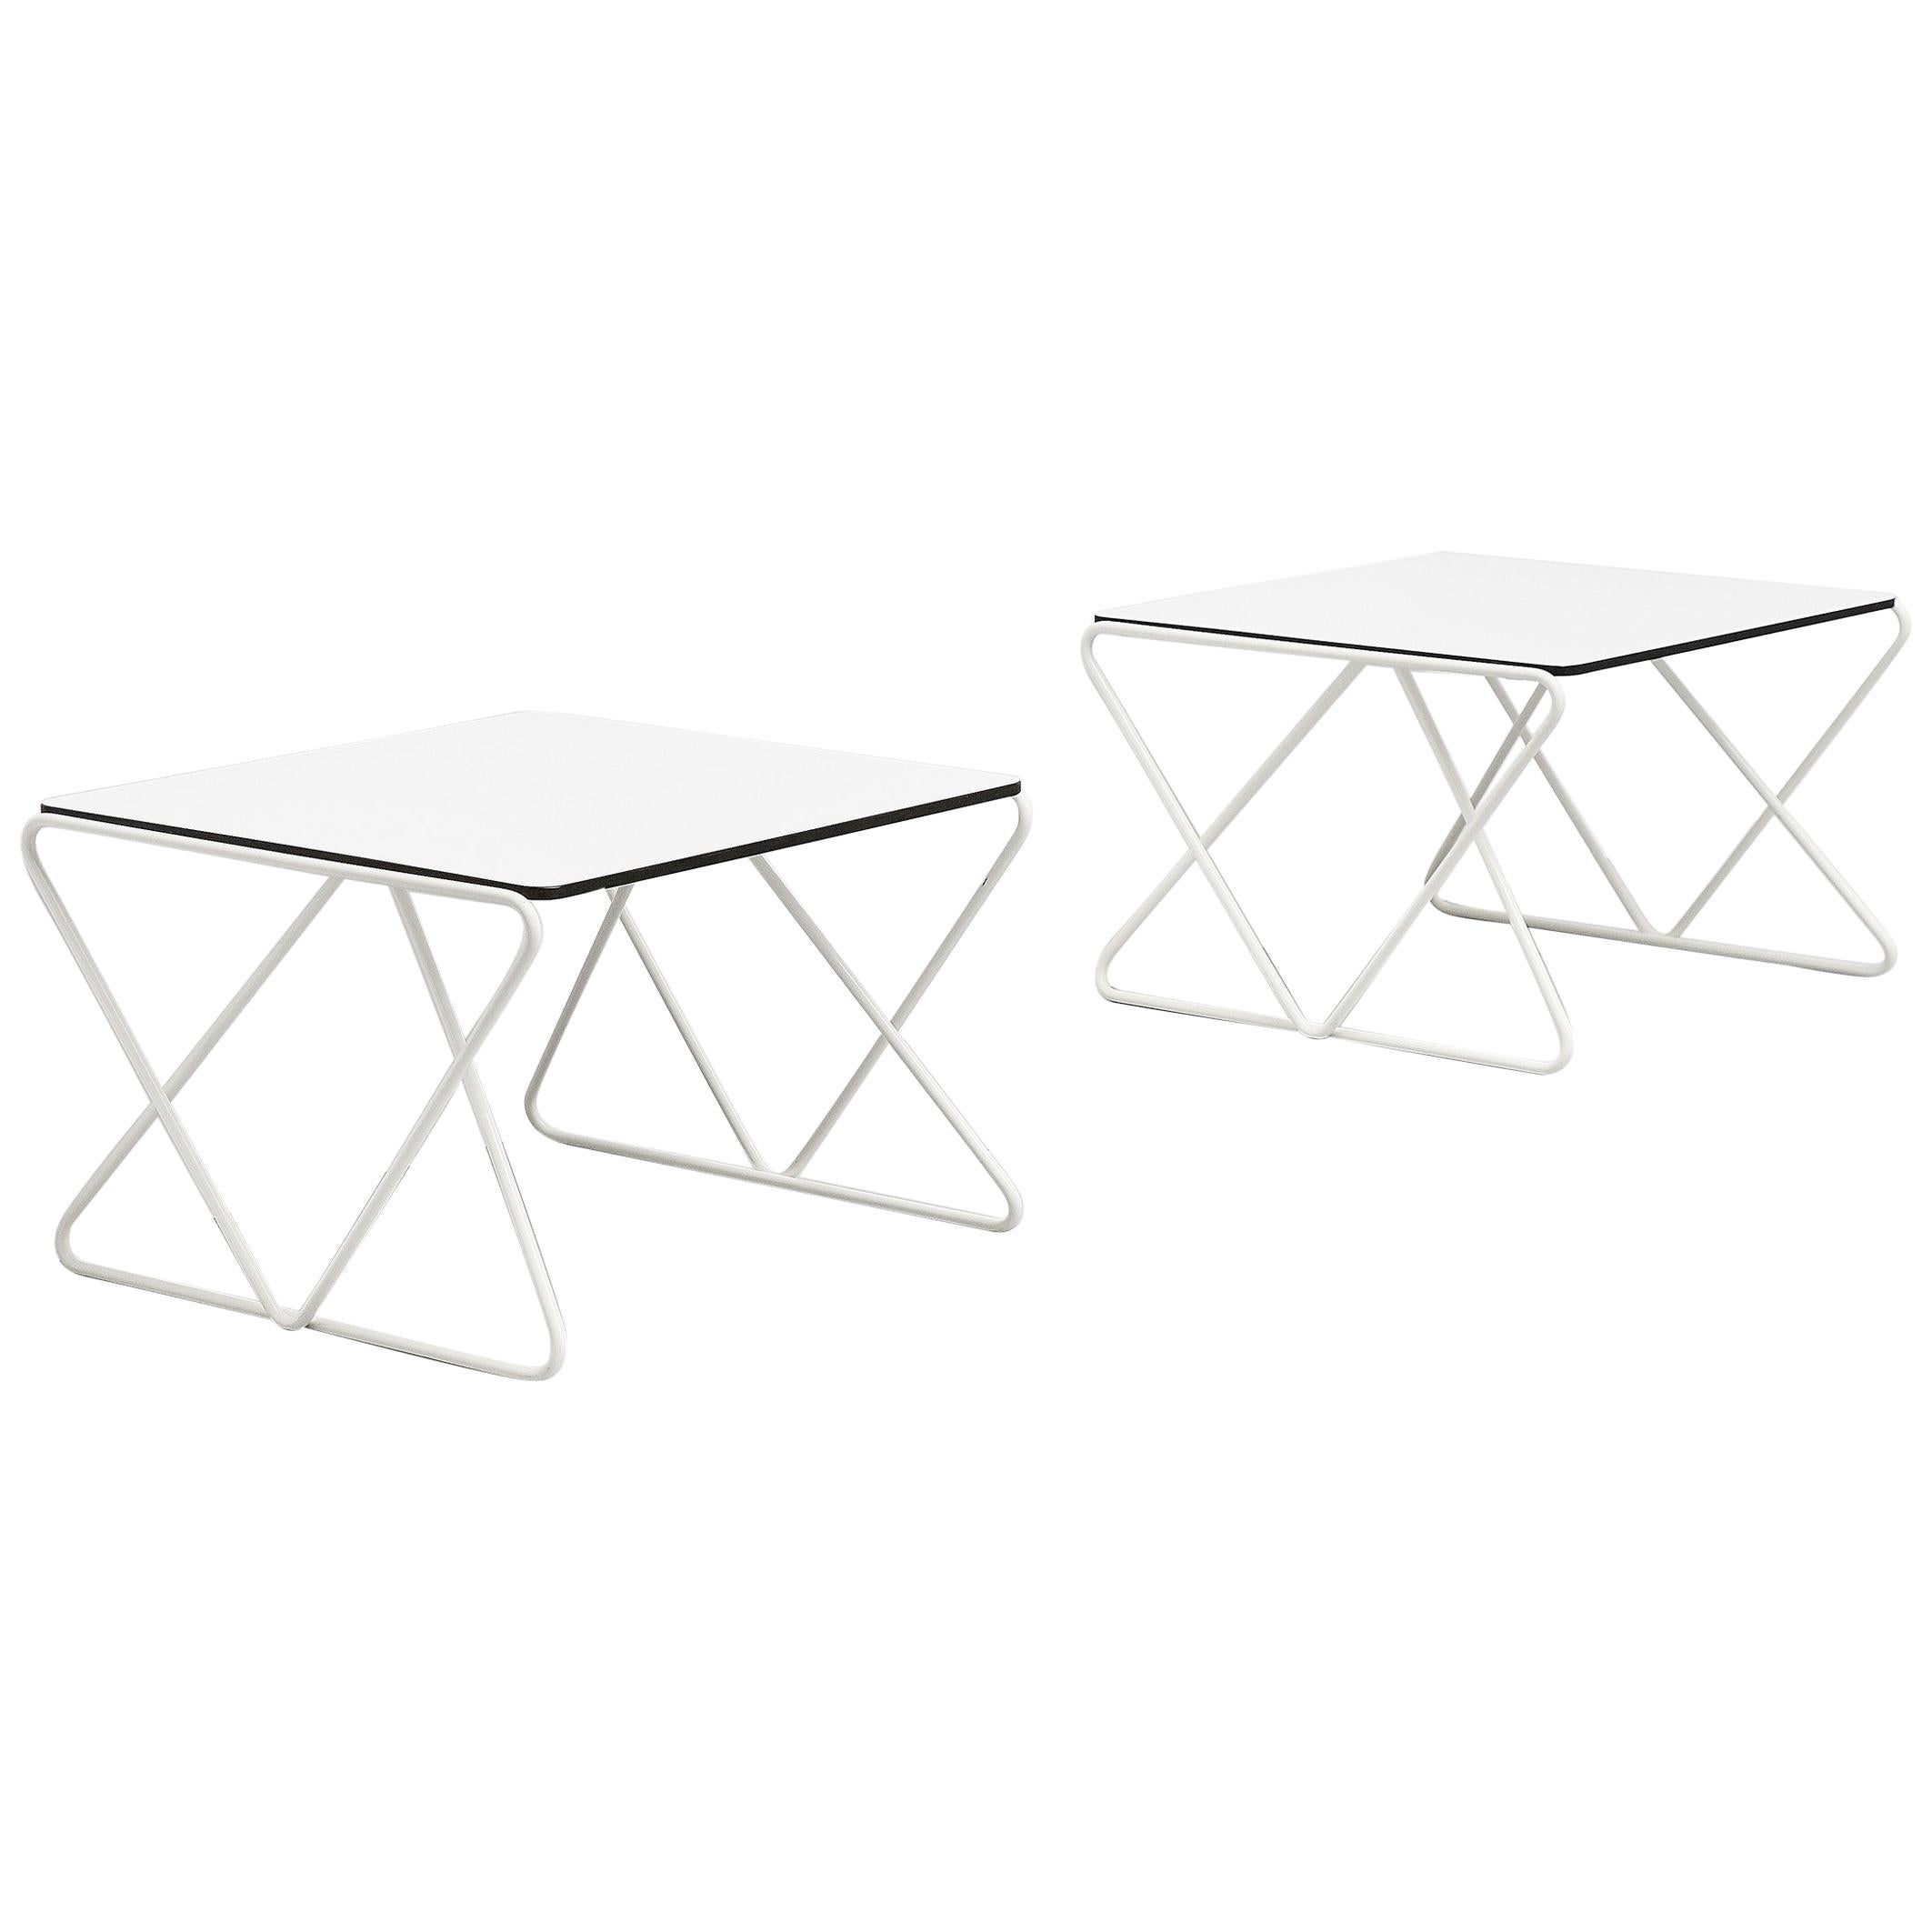 Tables d'appoint Walter Antonis pour I-Form Holland, 1978